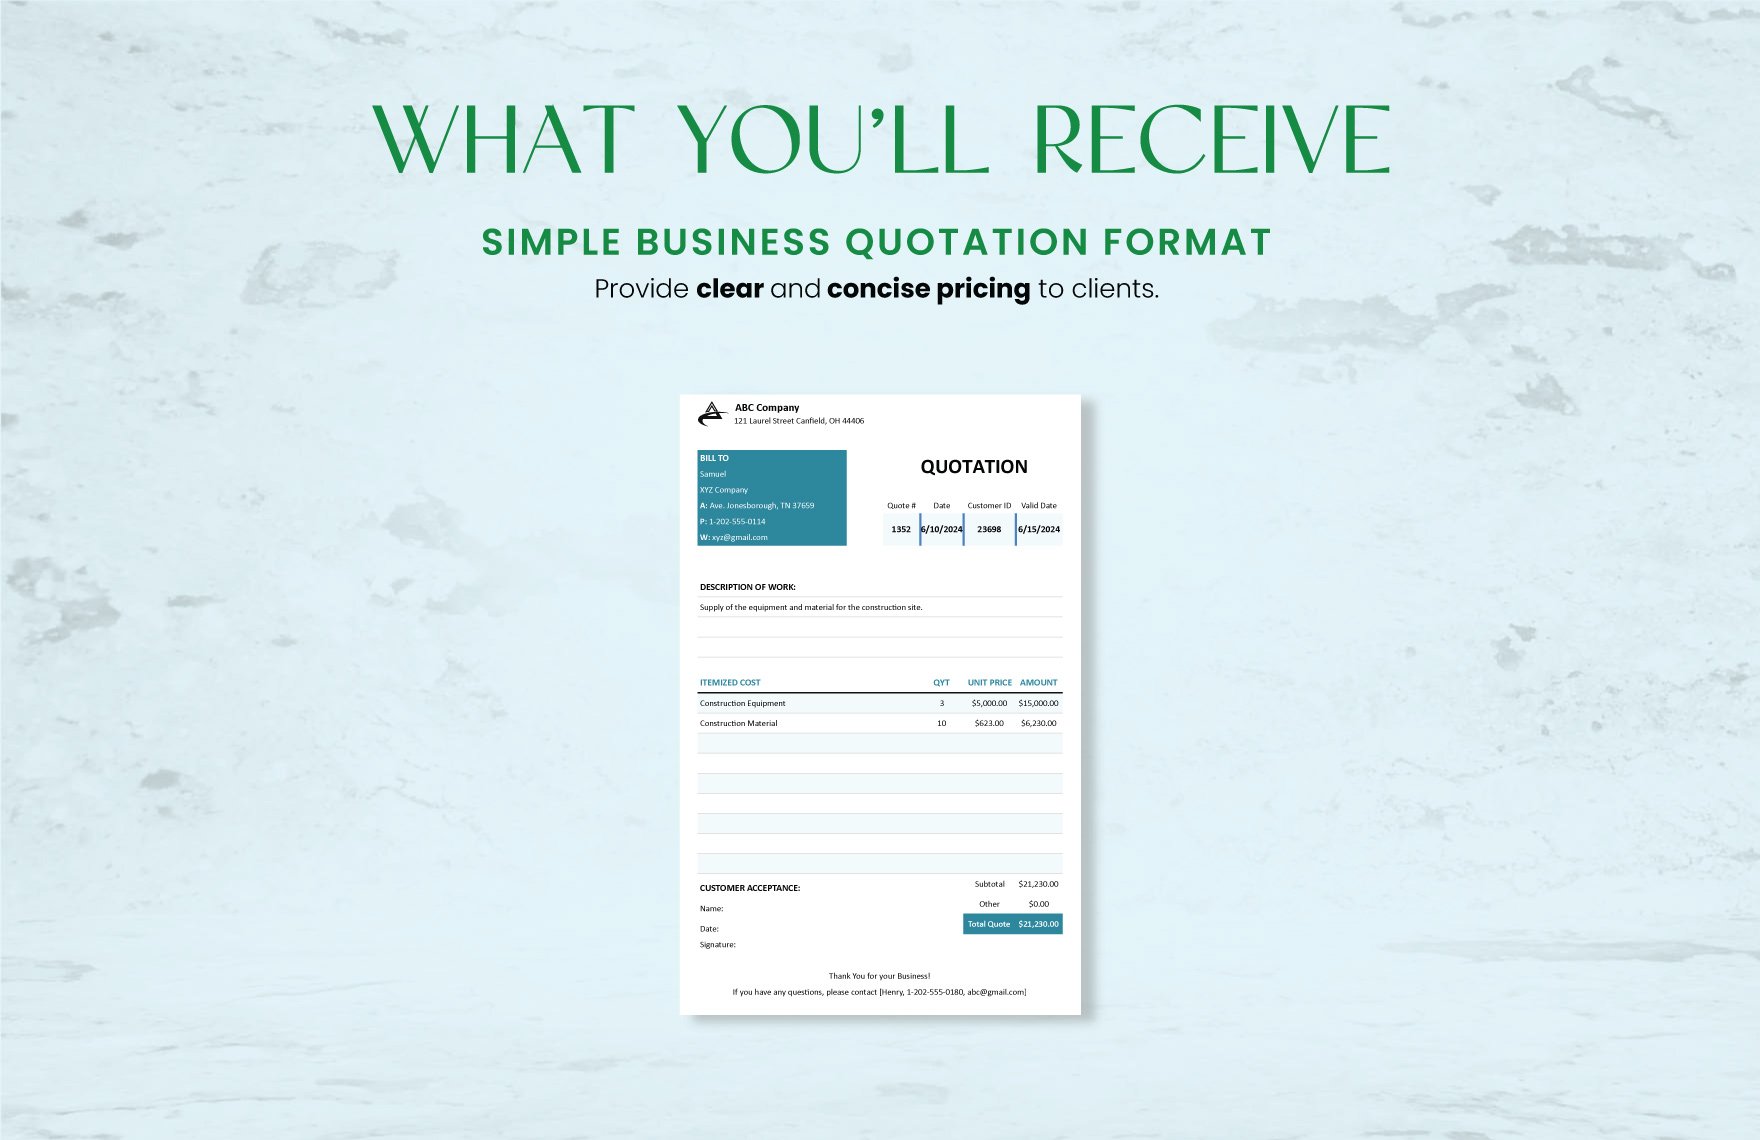 Simple Business Quotation Format Template